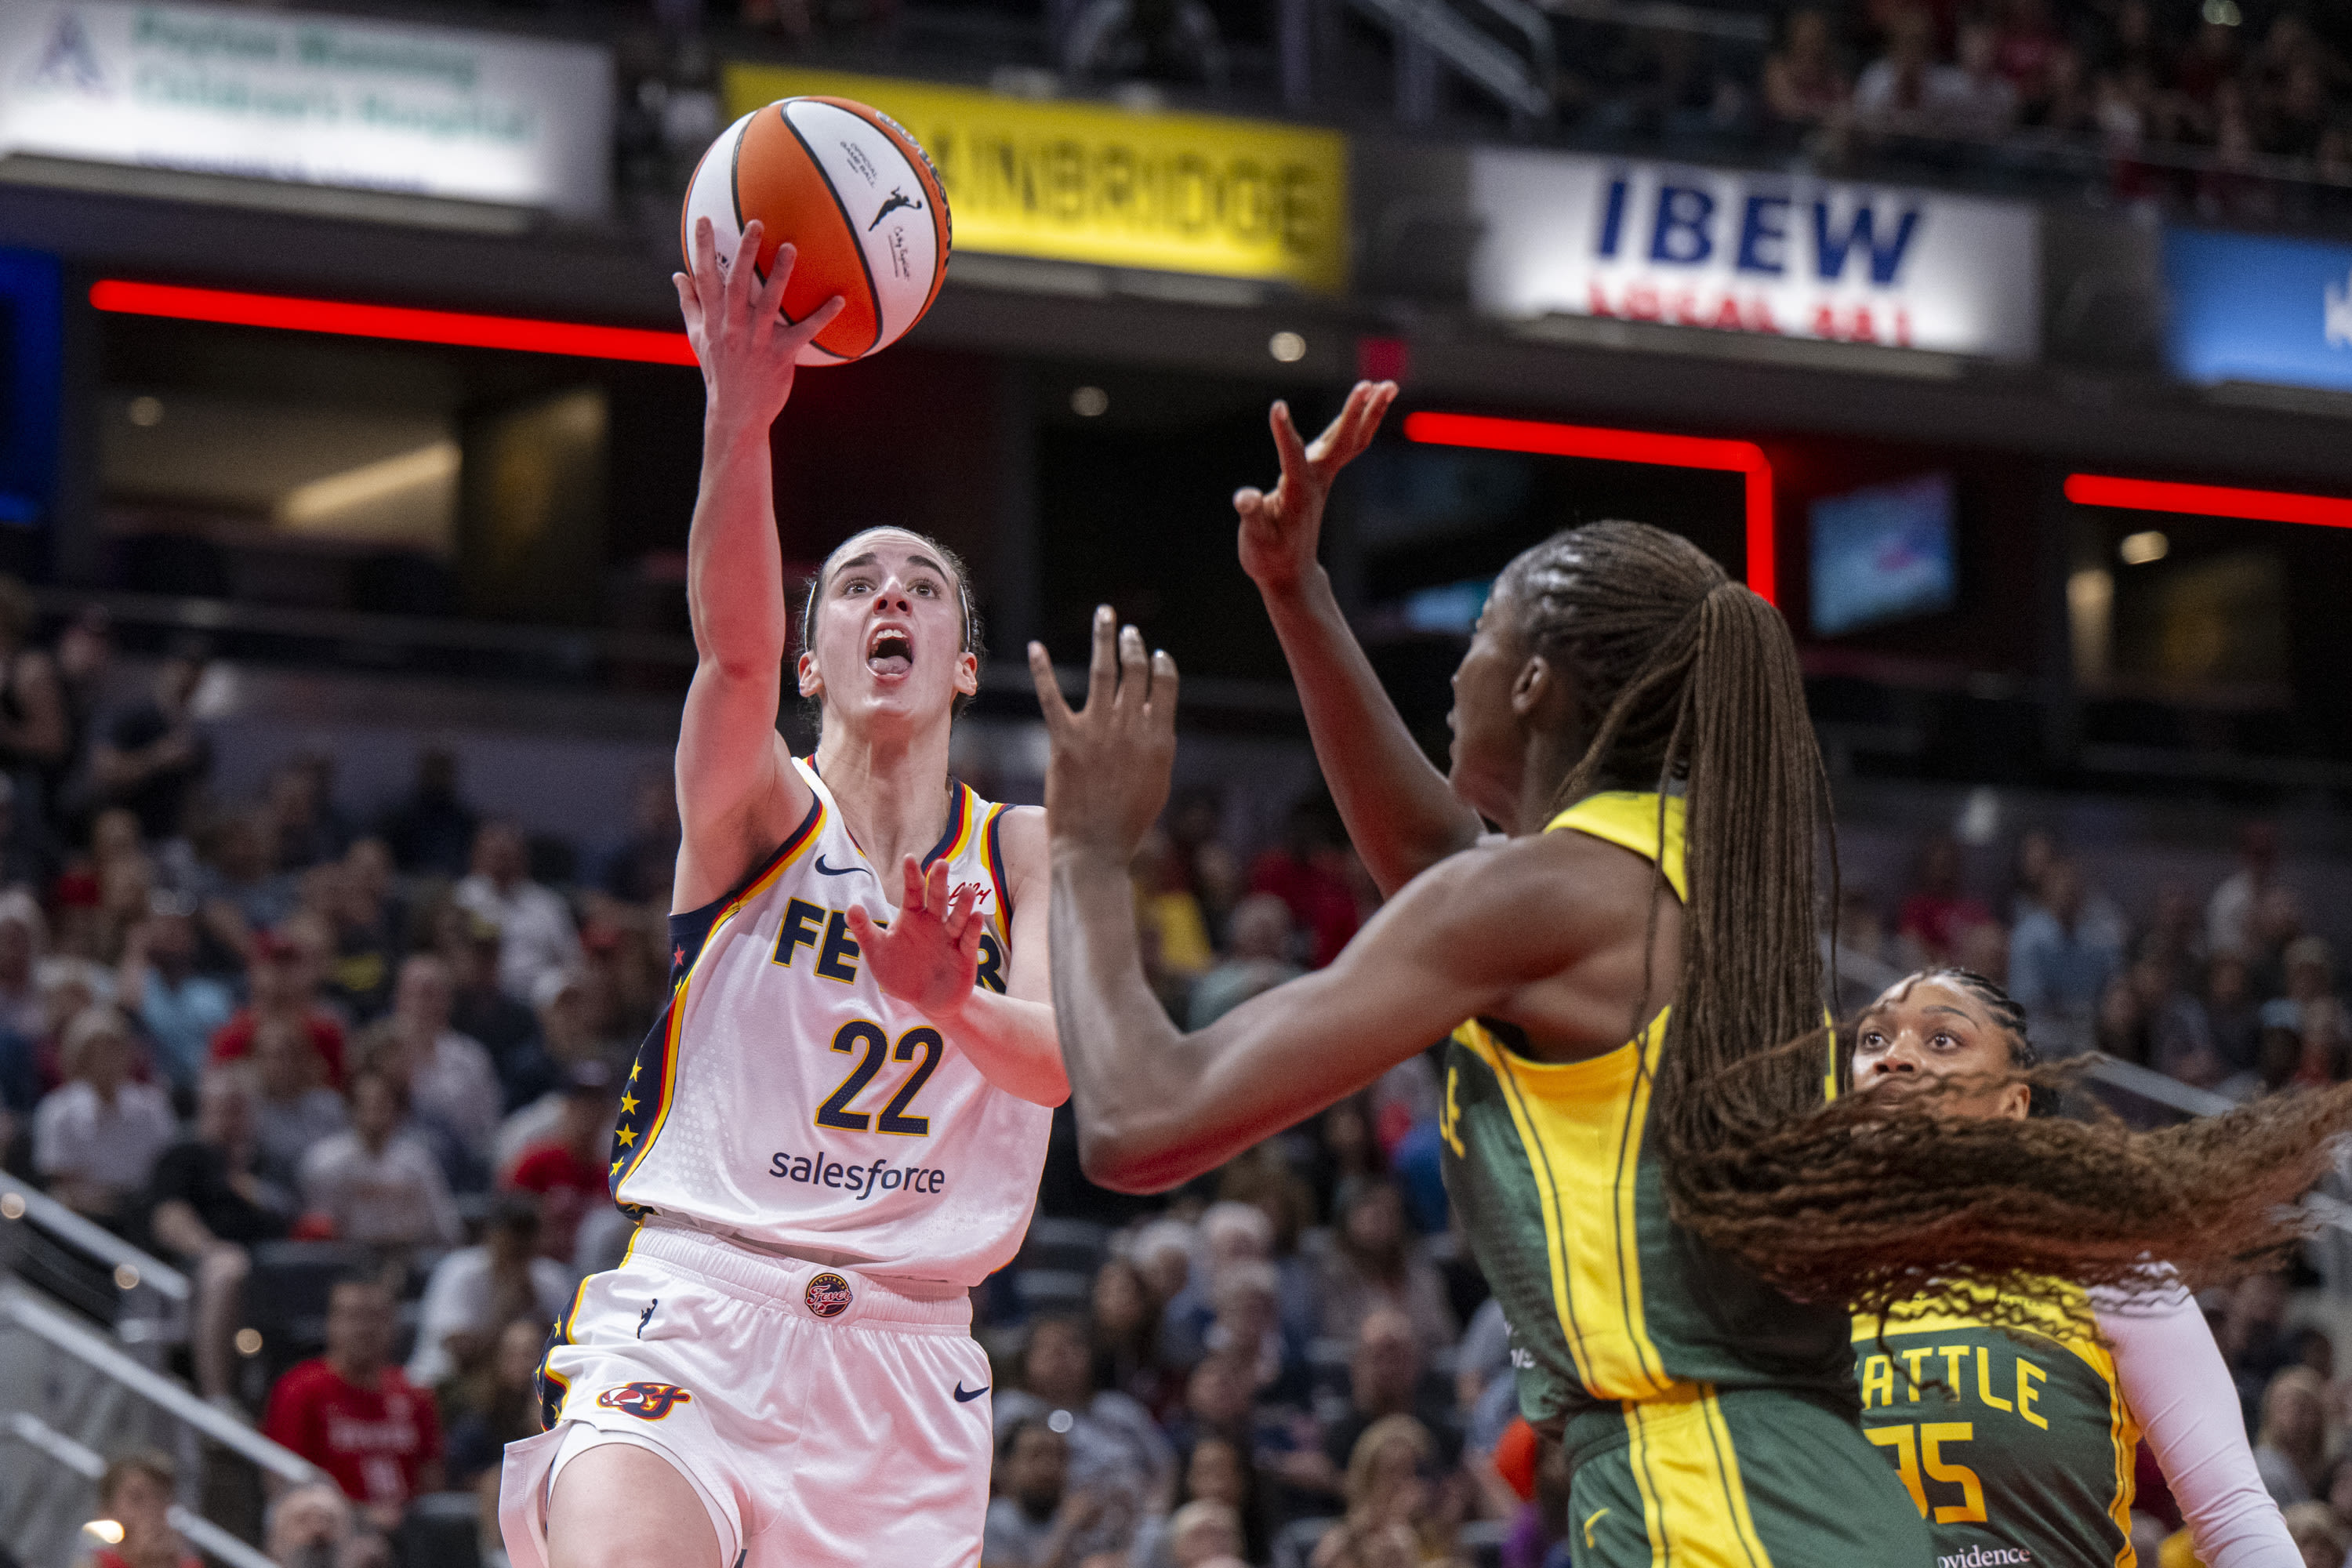 Caitlin Clark scores 20 points, but Jewell Loyd gets 22 to lead Storm over Fever 103-88